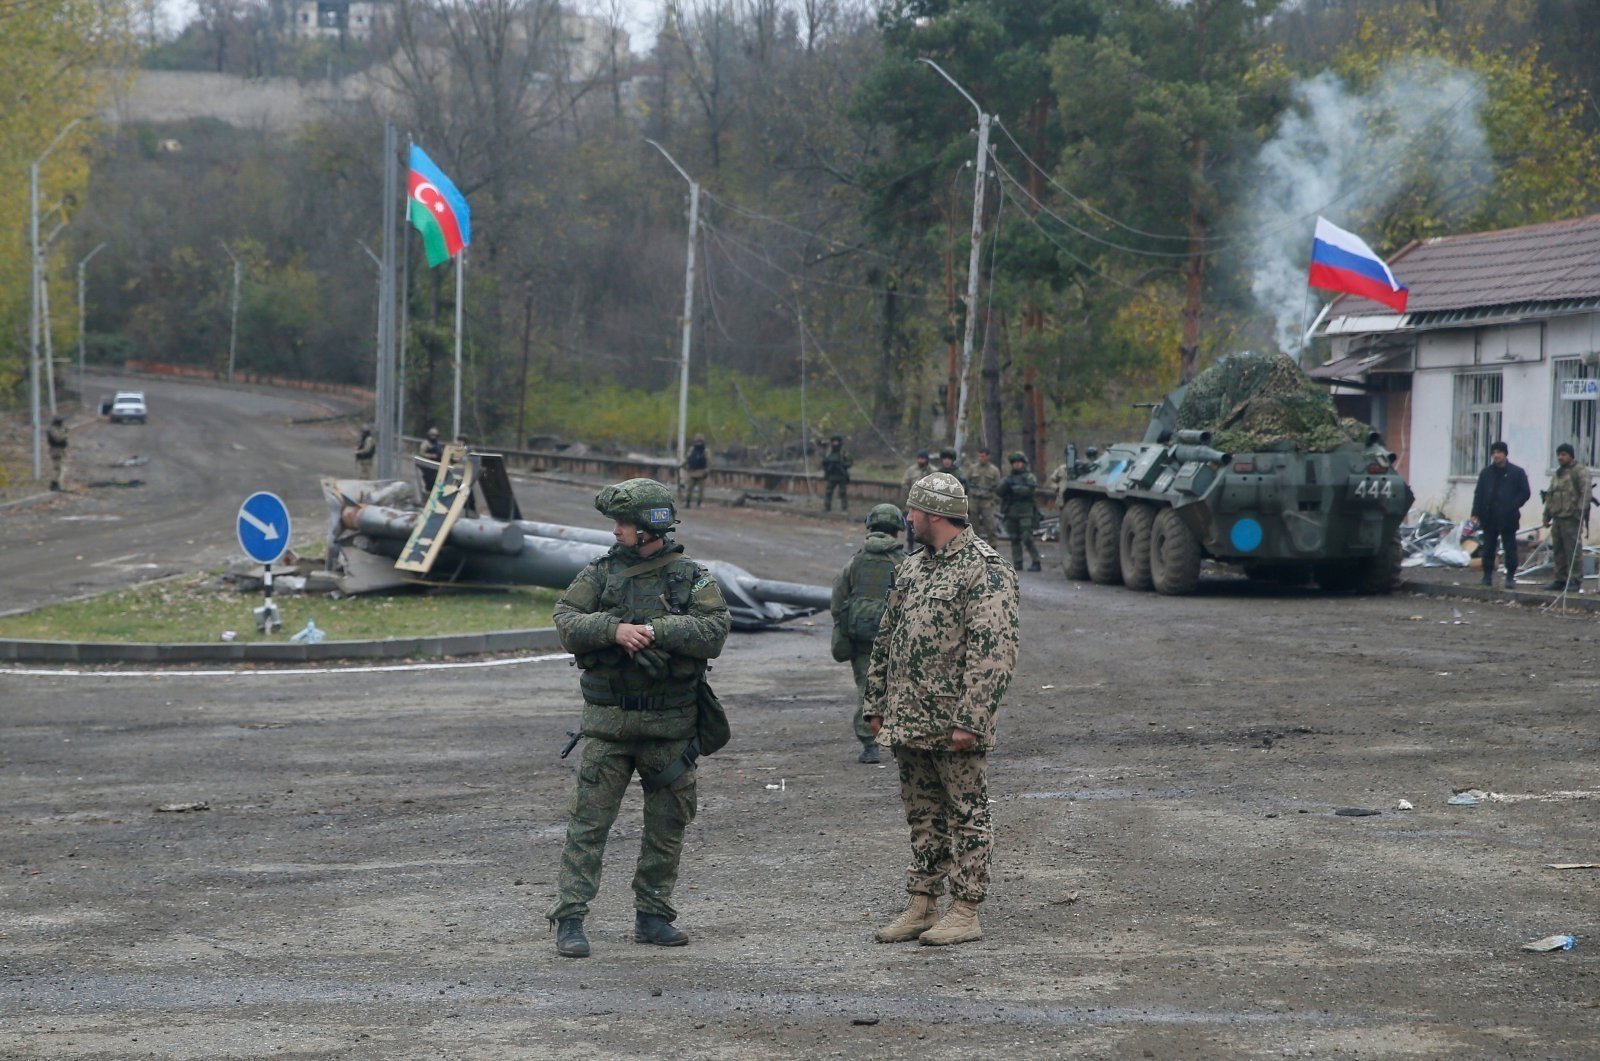 An Azerbaijani service member and a Russian peacekeeper stand guard at a checkpoint on the outskirts of Shusha in the region of Karabakh, Azerbaijan, Nov. 13, 2020. (Reuters Photo)